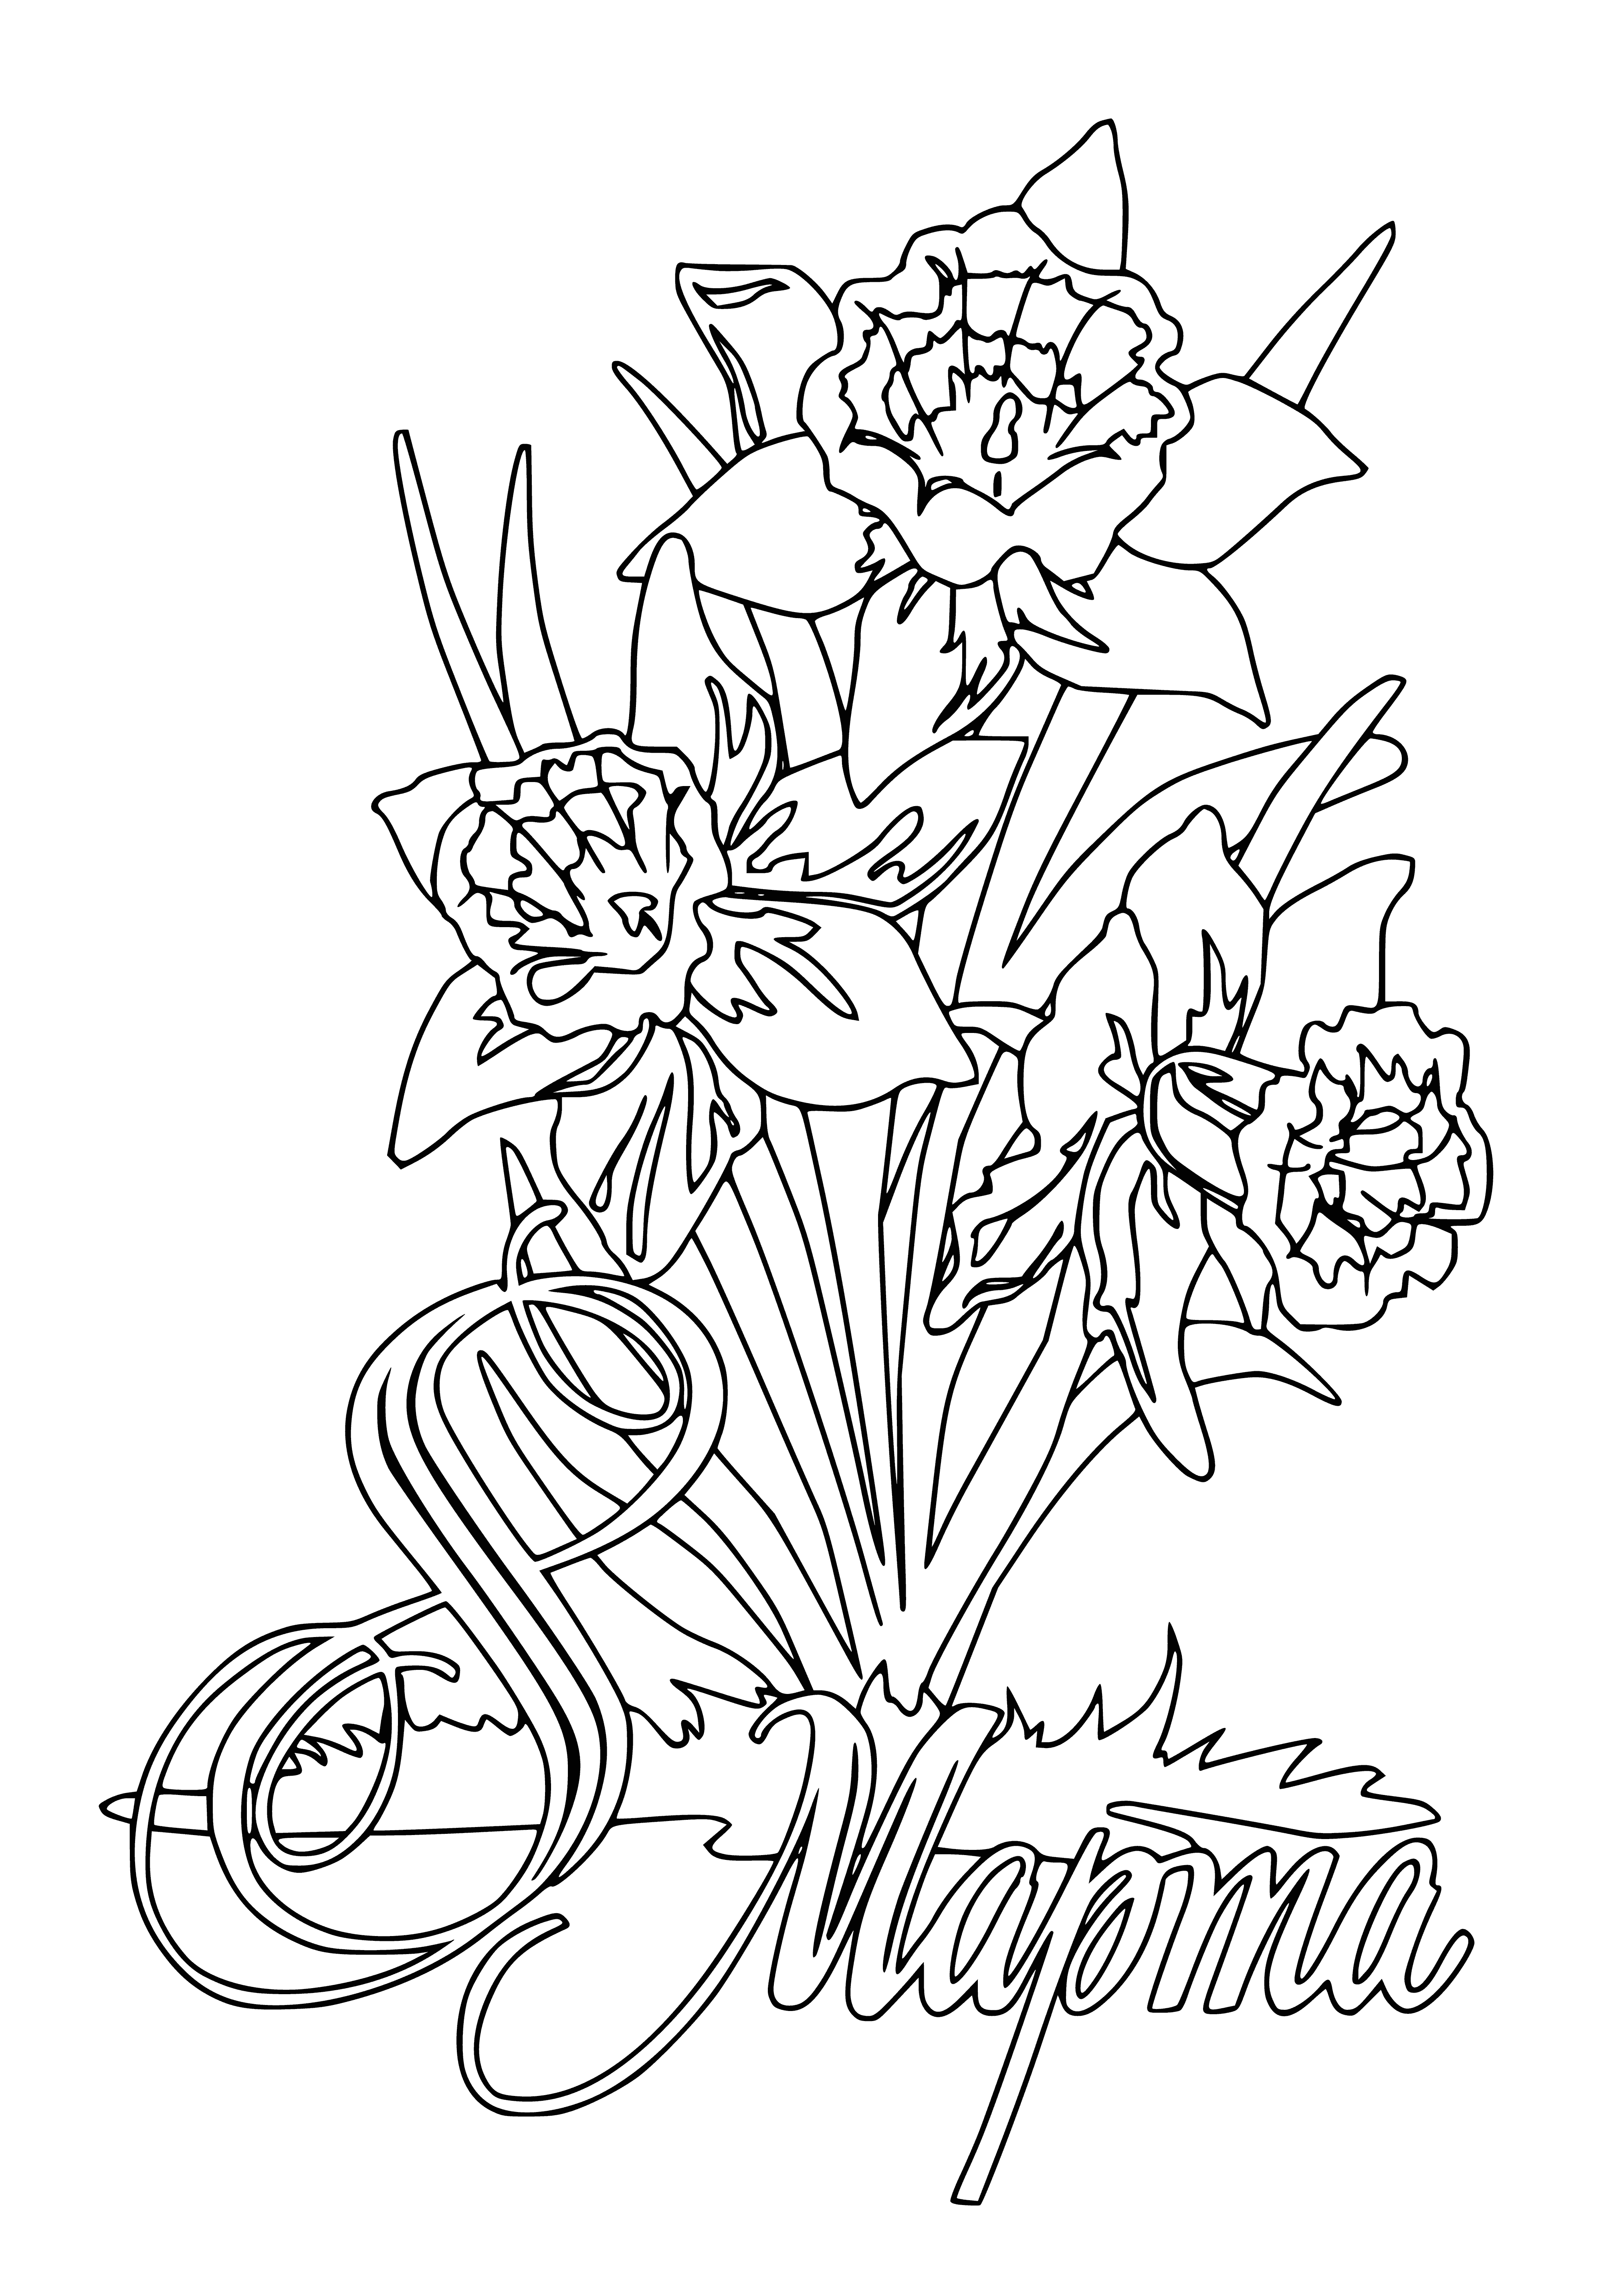 coloring page: Crowd of people celebrating International Women's Day w/ banners & daffodils, standing in front of a large stage w/ microphone. #IWD2021